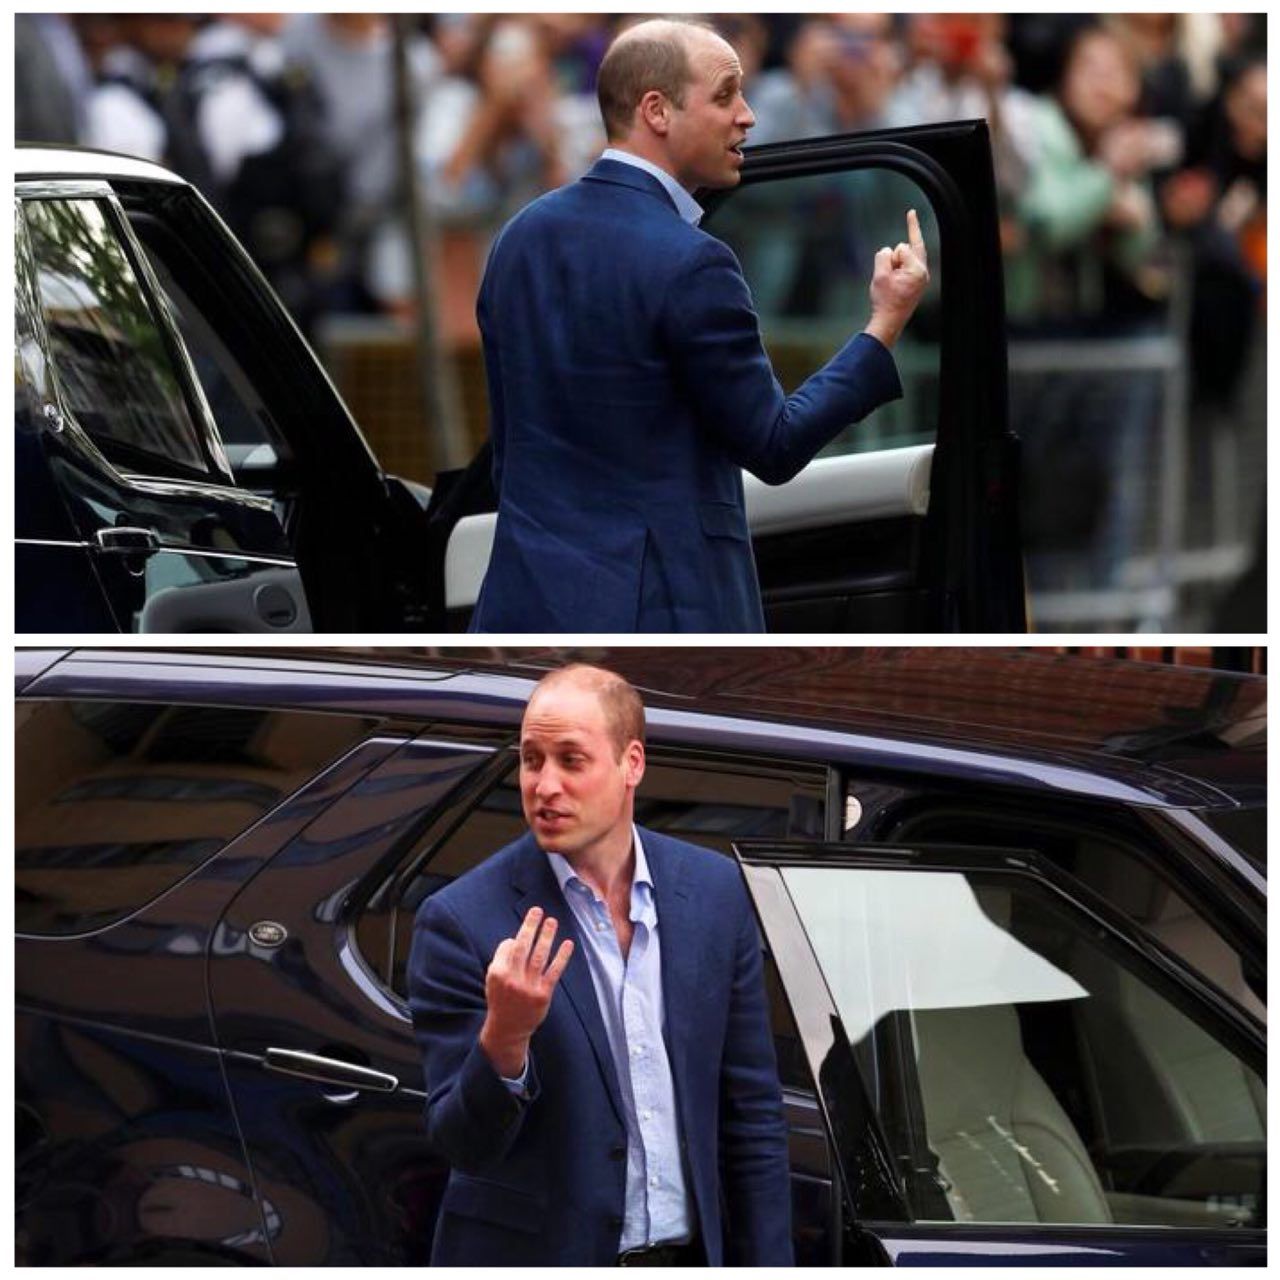 Prince William. It's all about point of view.